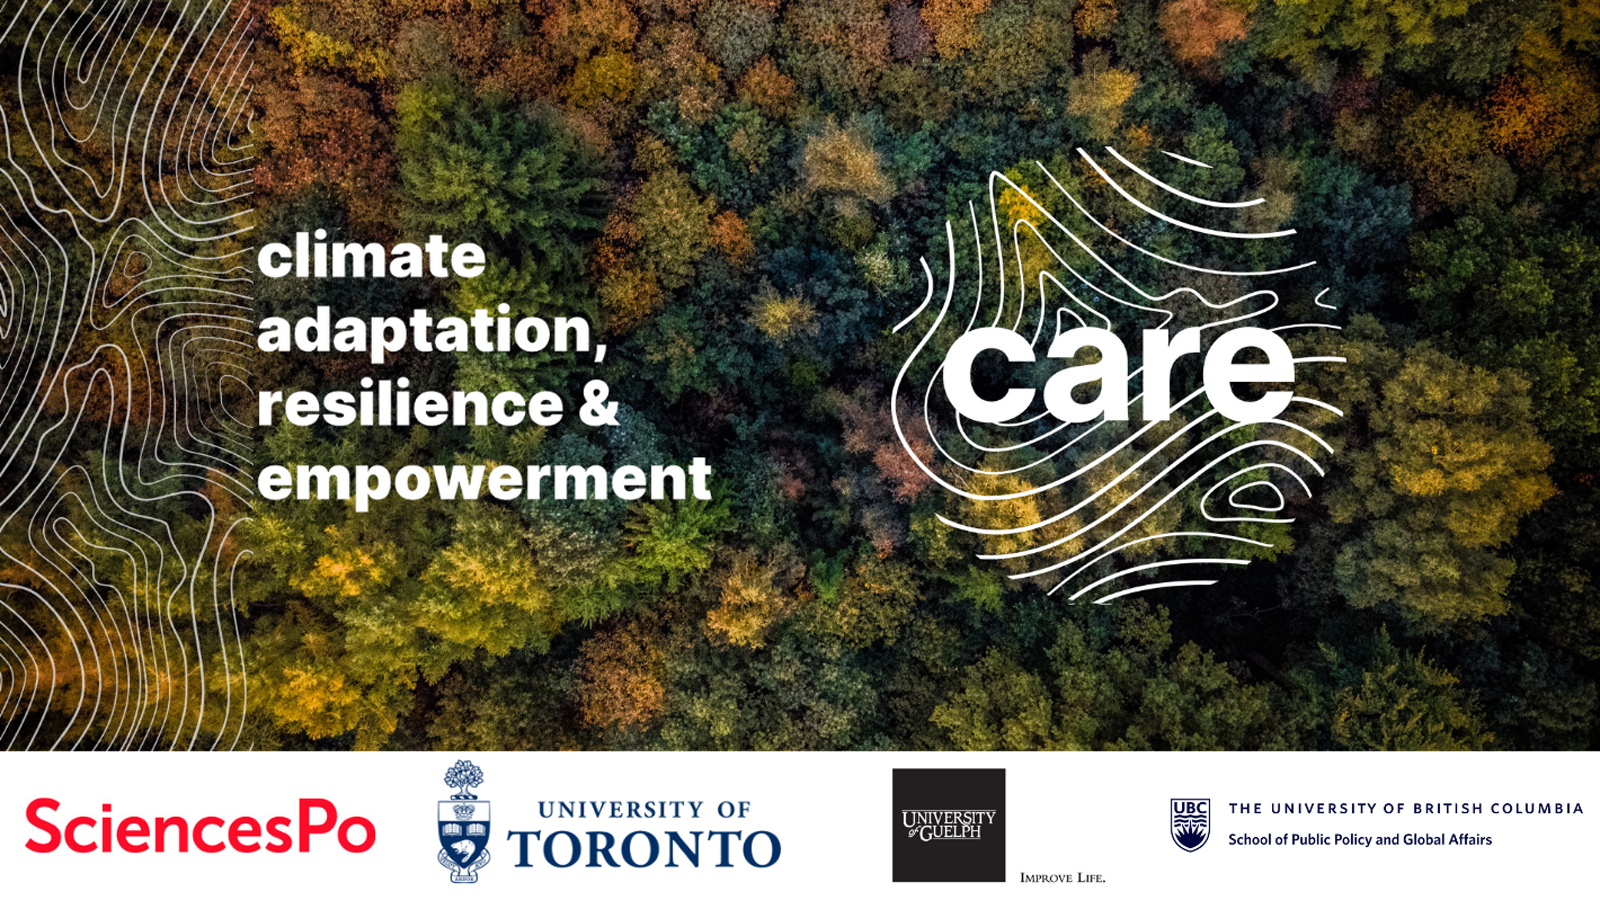 THE CARE PROGRAM: A NEW MULTI-UNIVERSITY PARTNERSHIP TO SHAPE THE NEXT GENERATION OF GLOBAL CLIMATE LEADERS